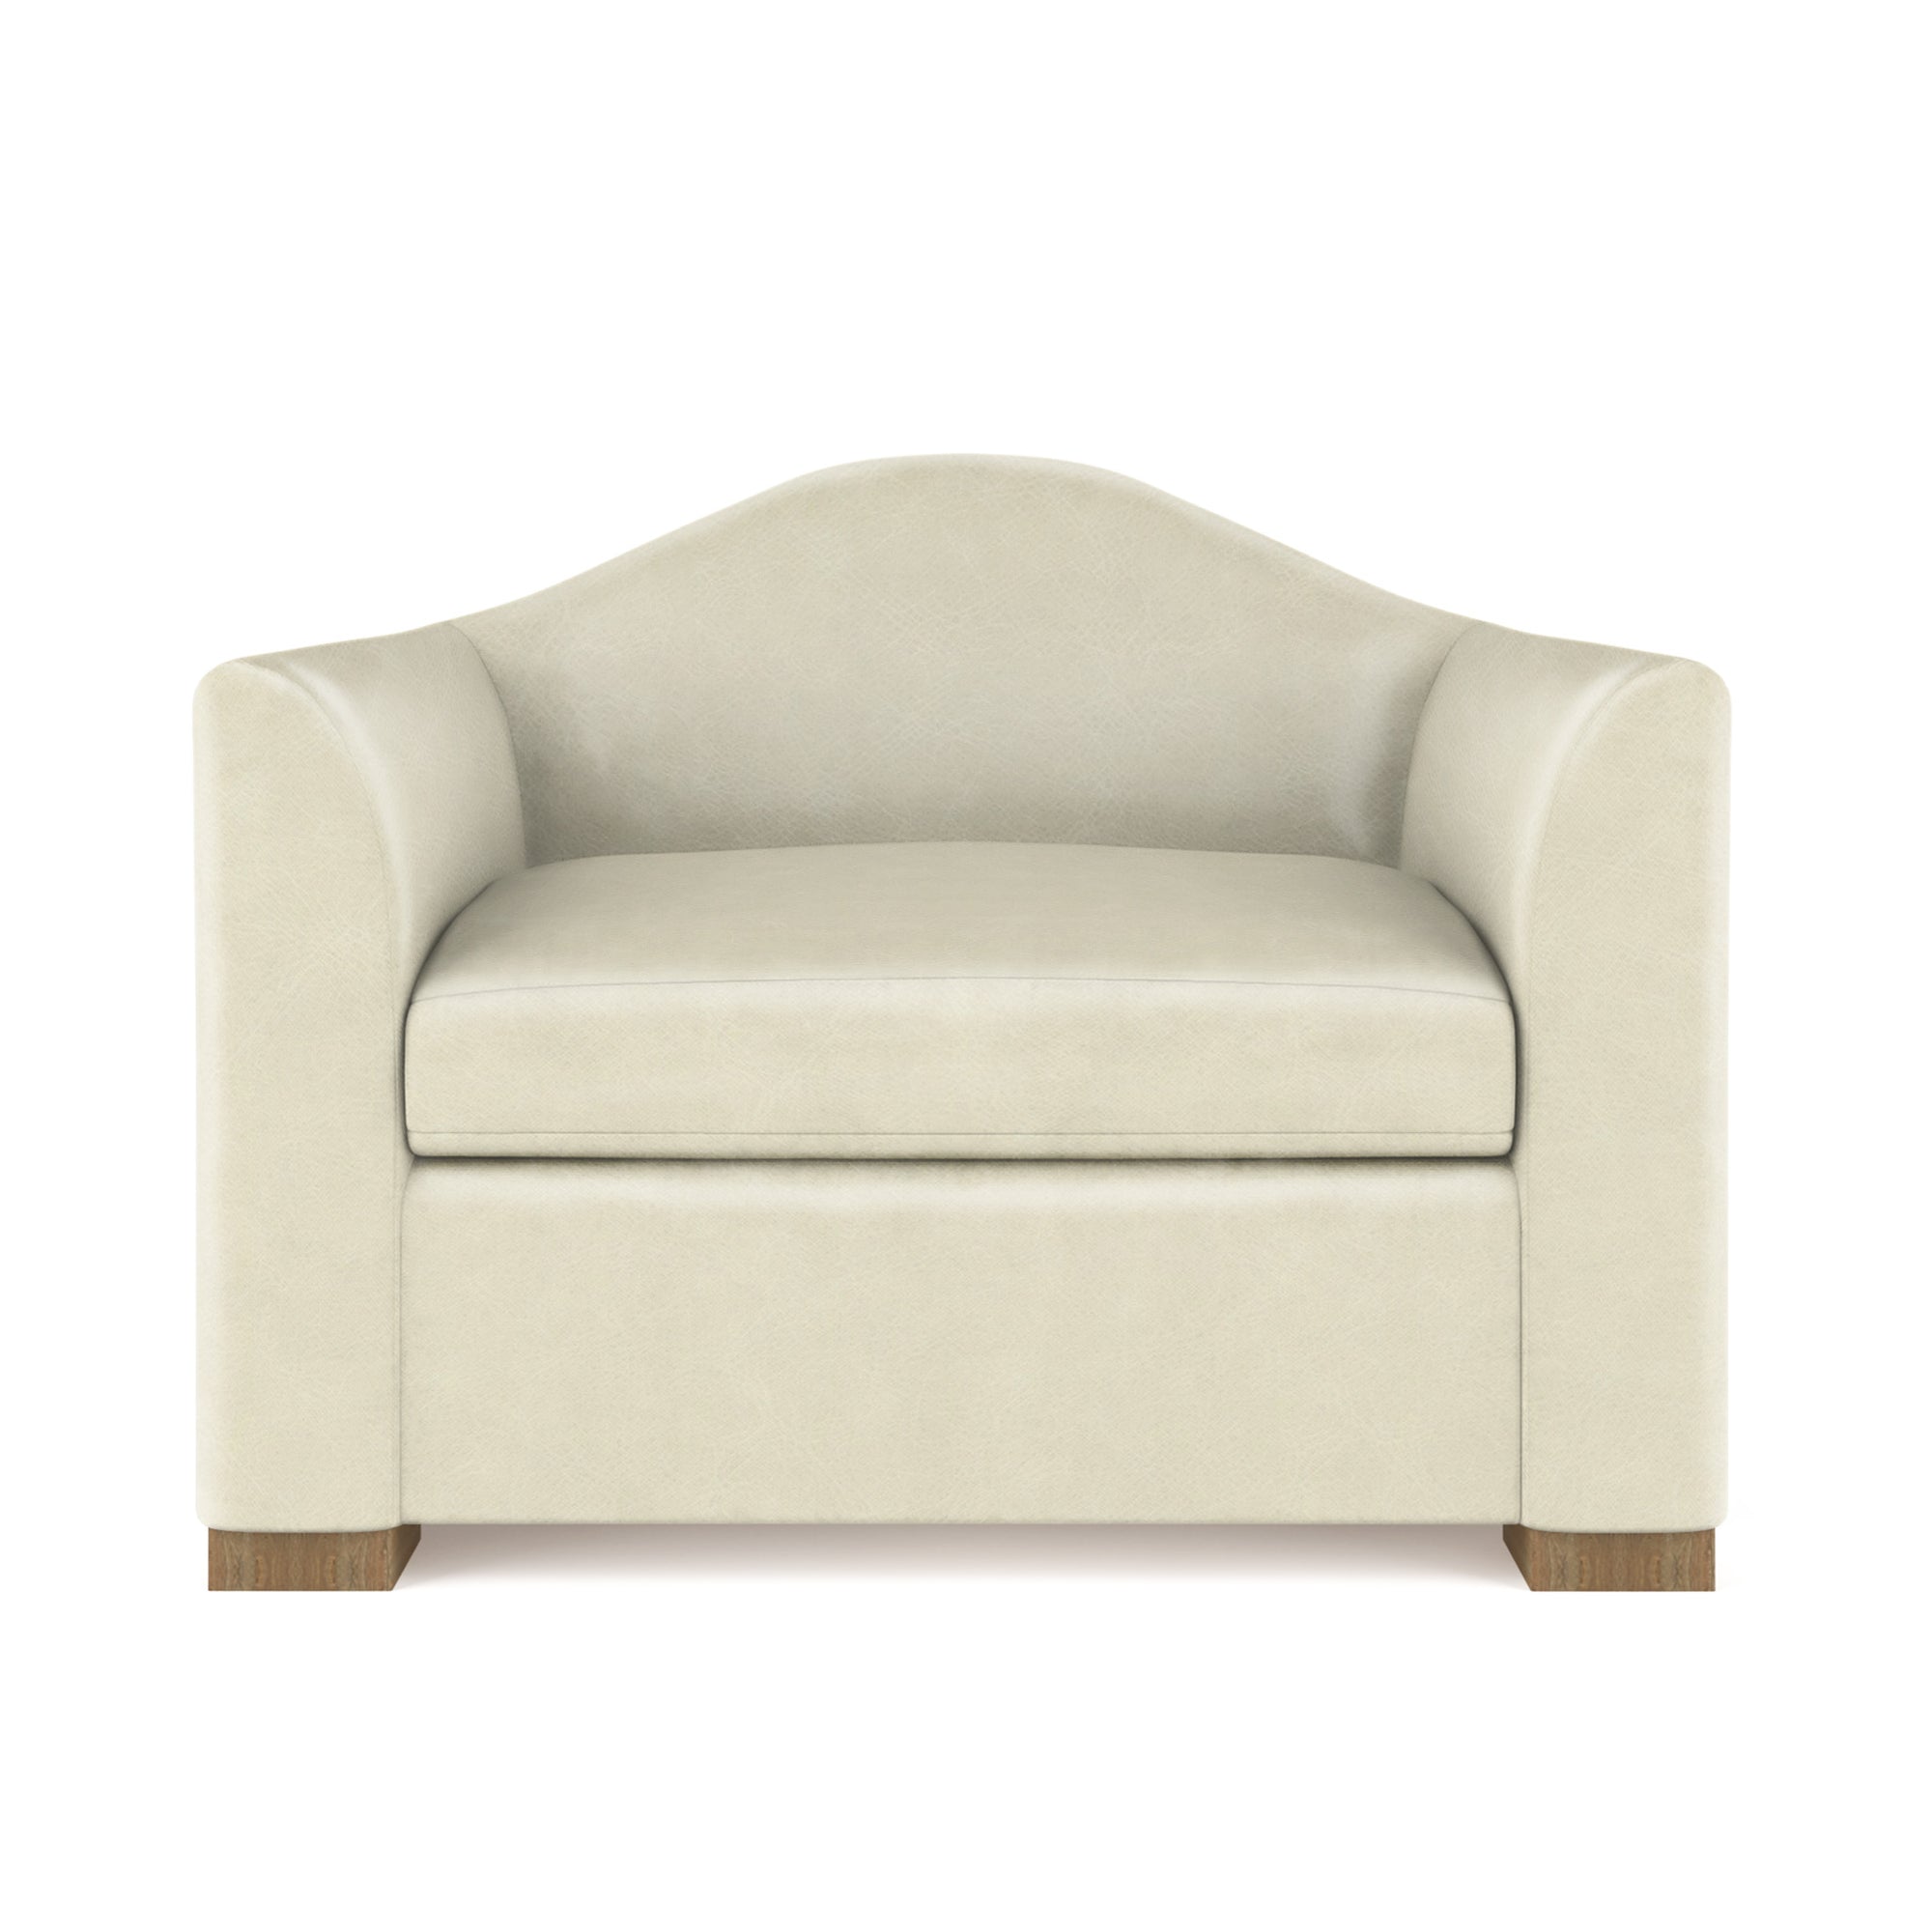 Horatio Chair - Alabaster Vintage Leather